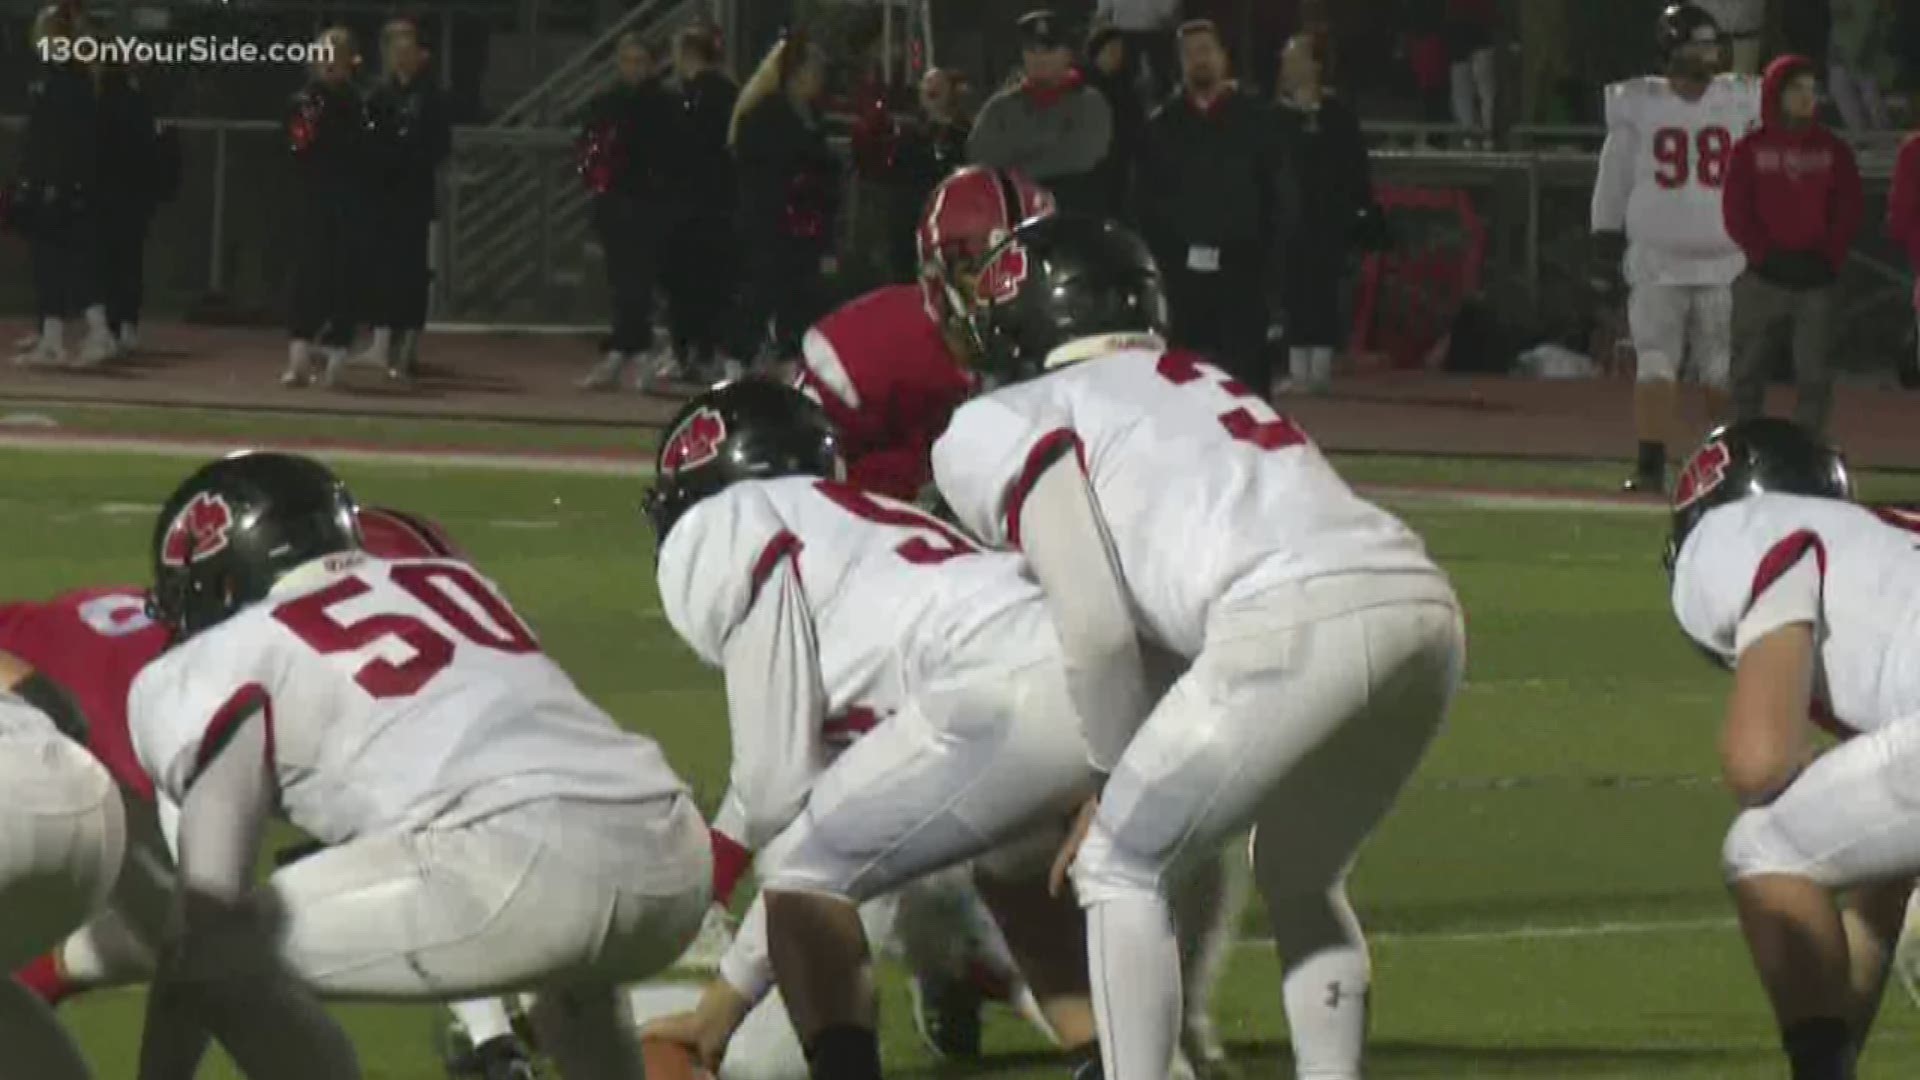 Lowell picked up a big 41-19 victory.